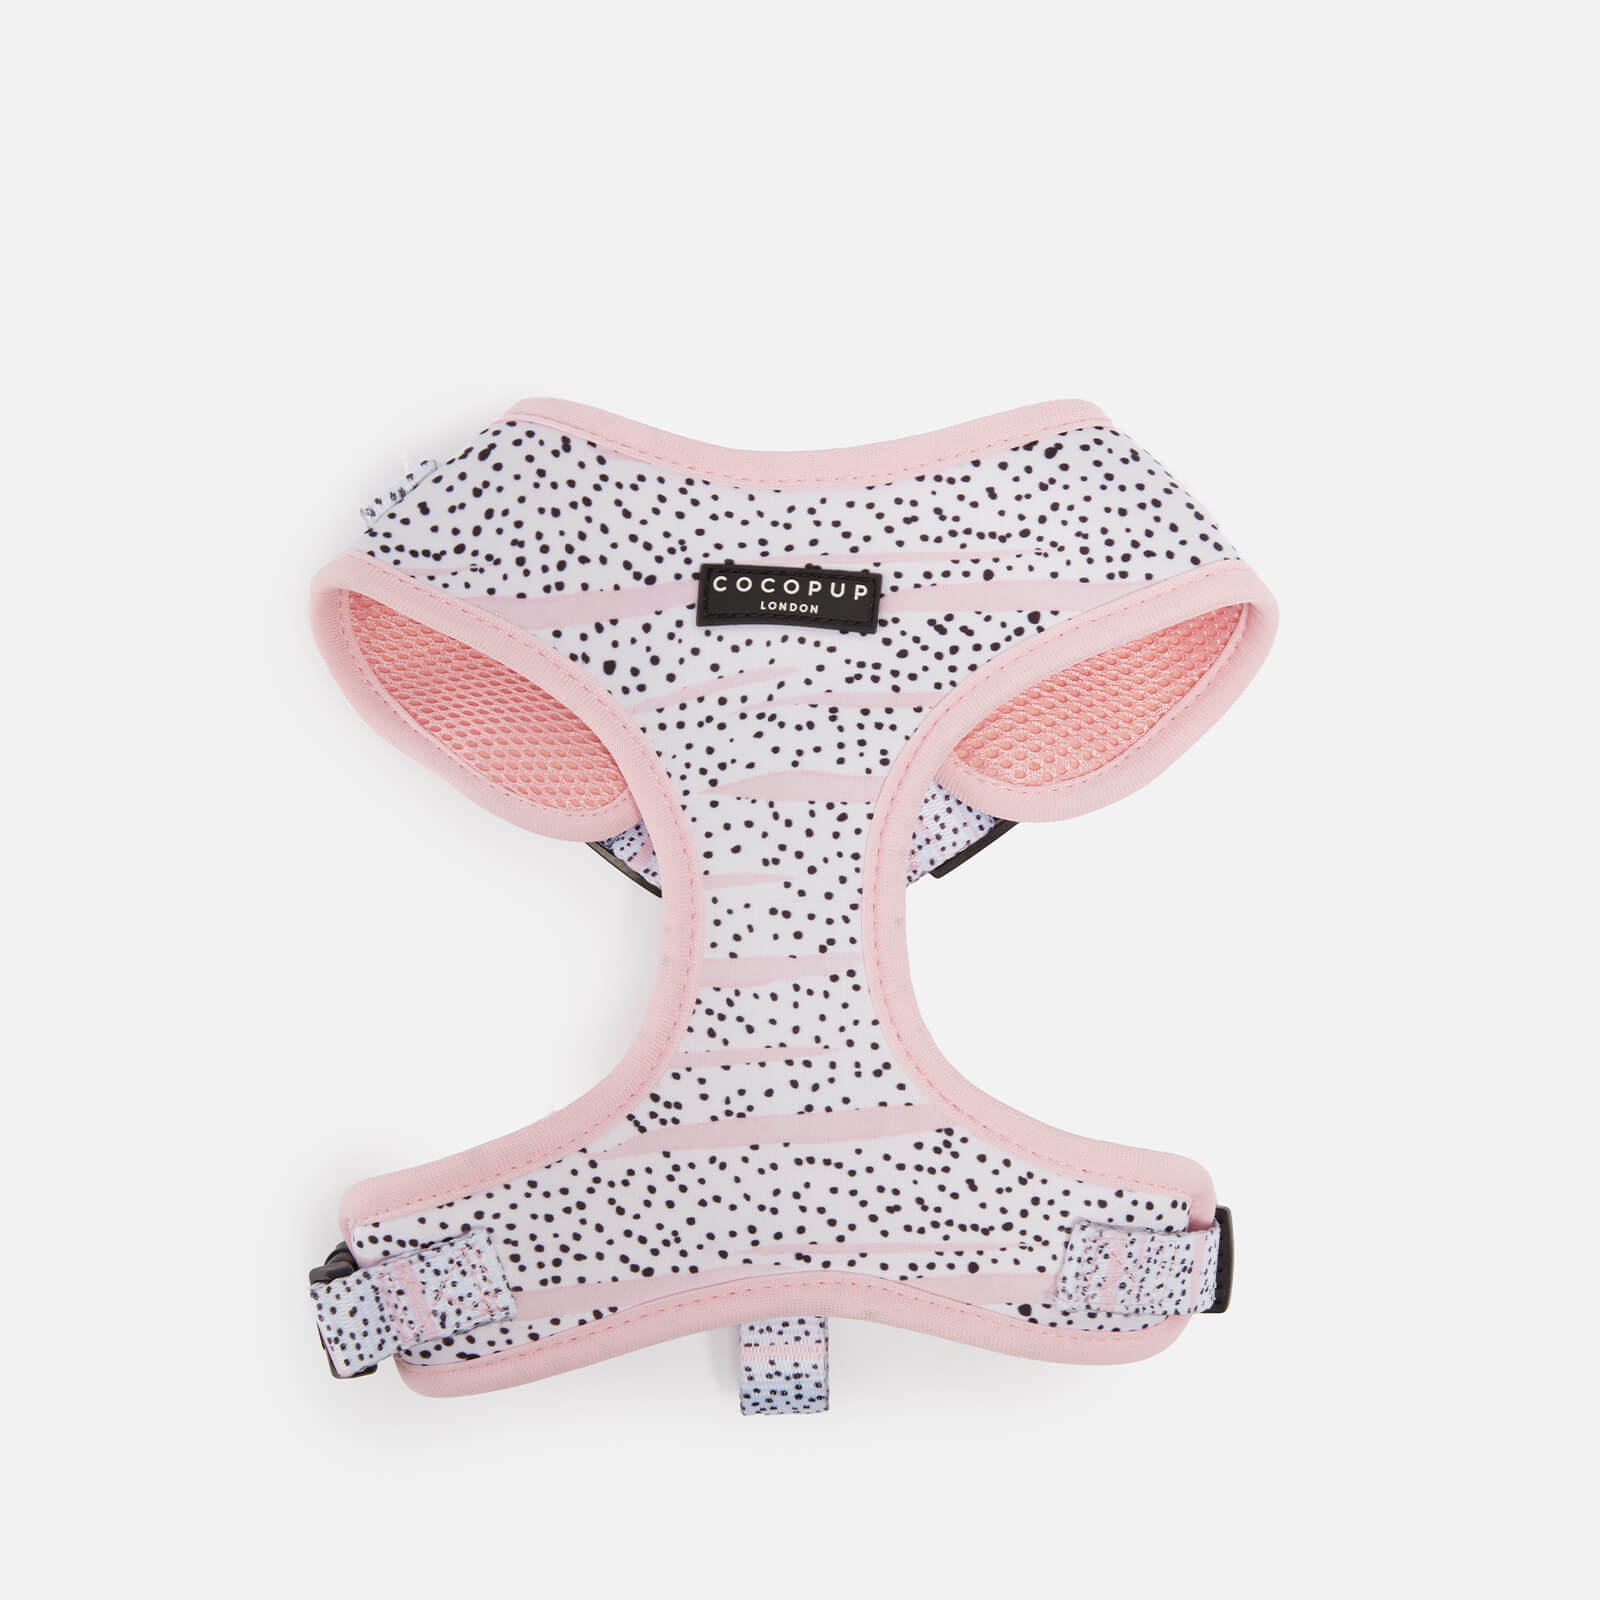 Cocopup Adjustable Dog Harness - Pink Dalmation - XS